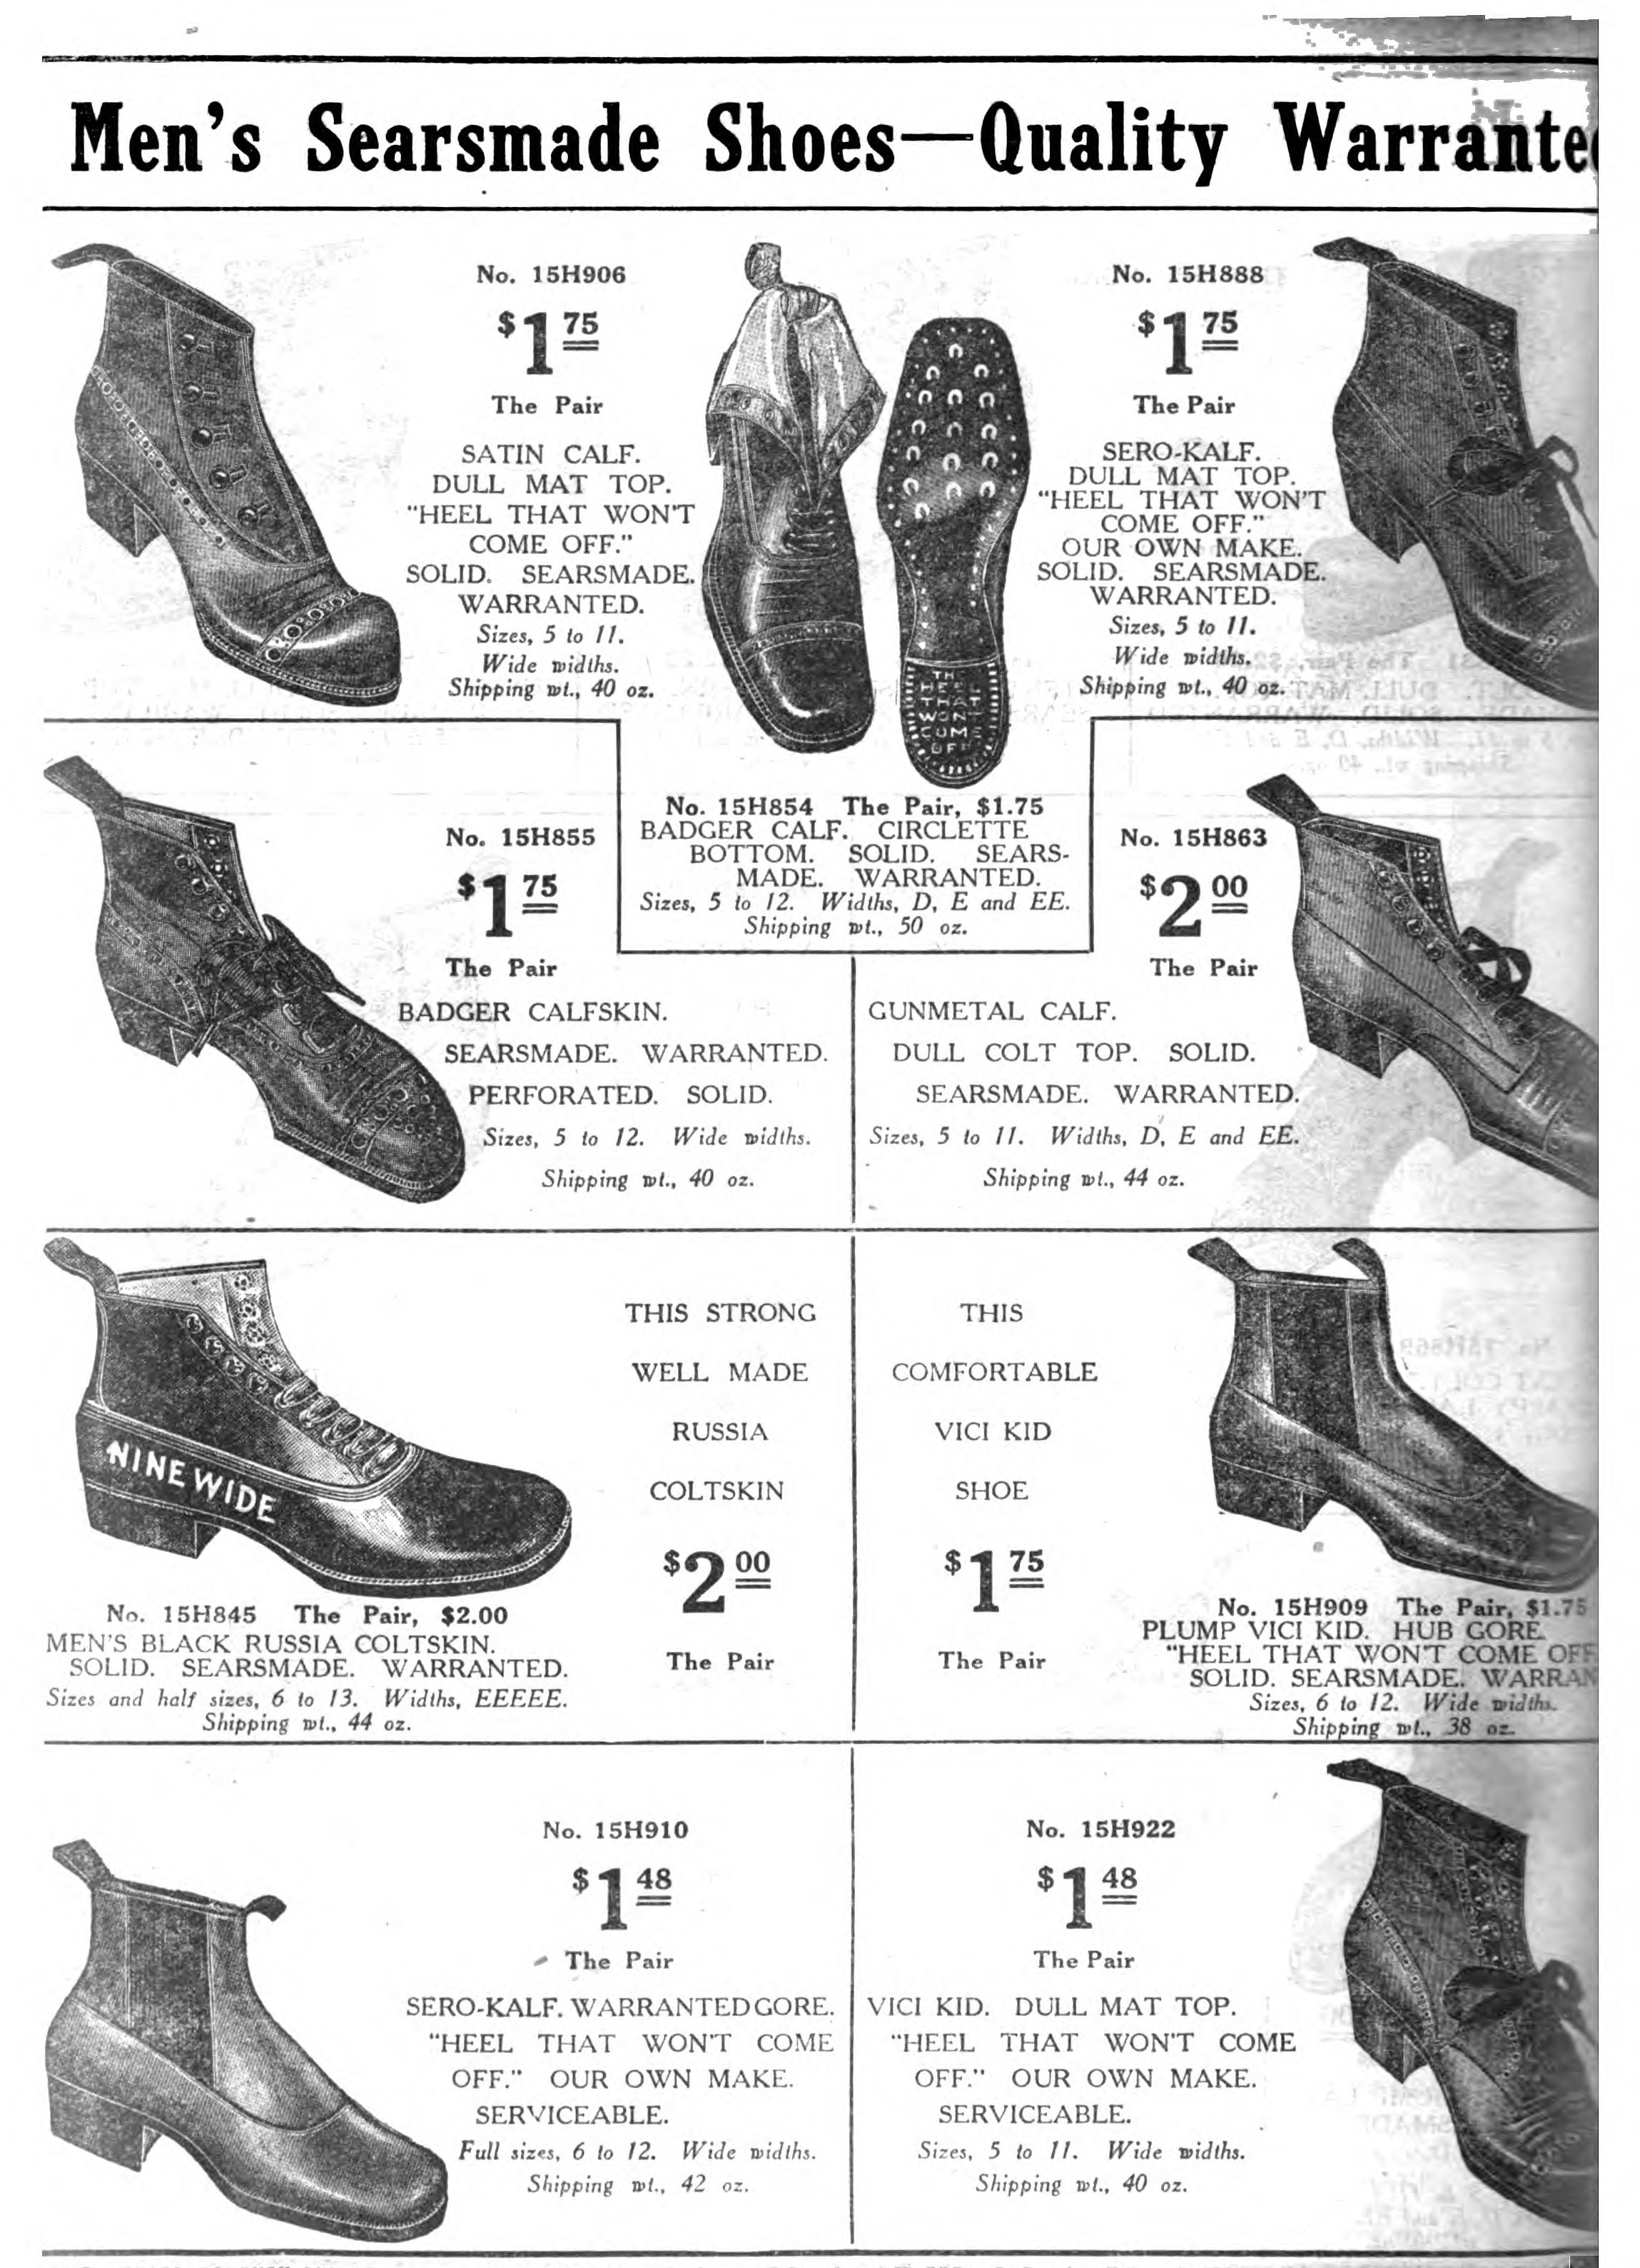 Vintage Shoe Ads Pre-WWII | Page 6 | The Fedora Lounge